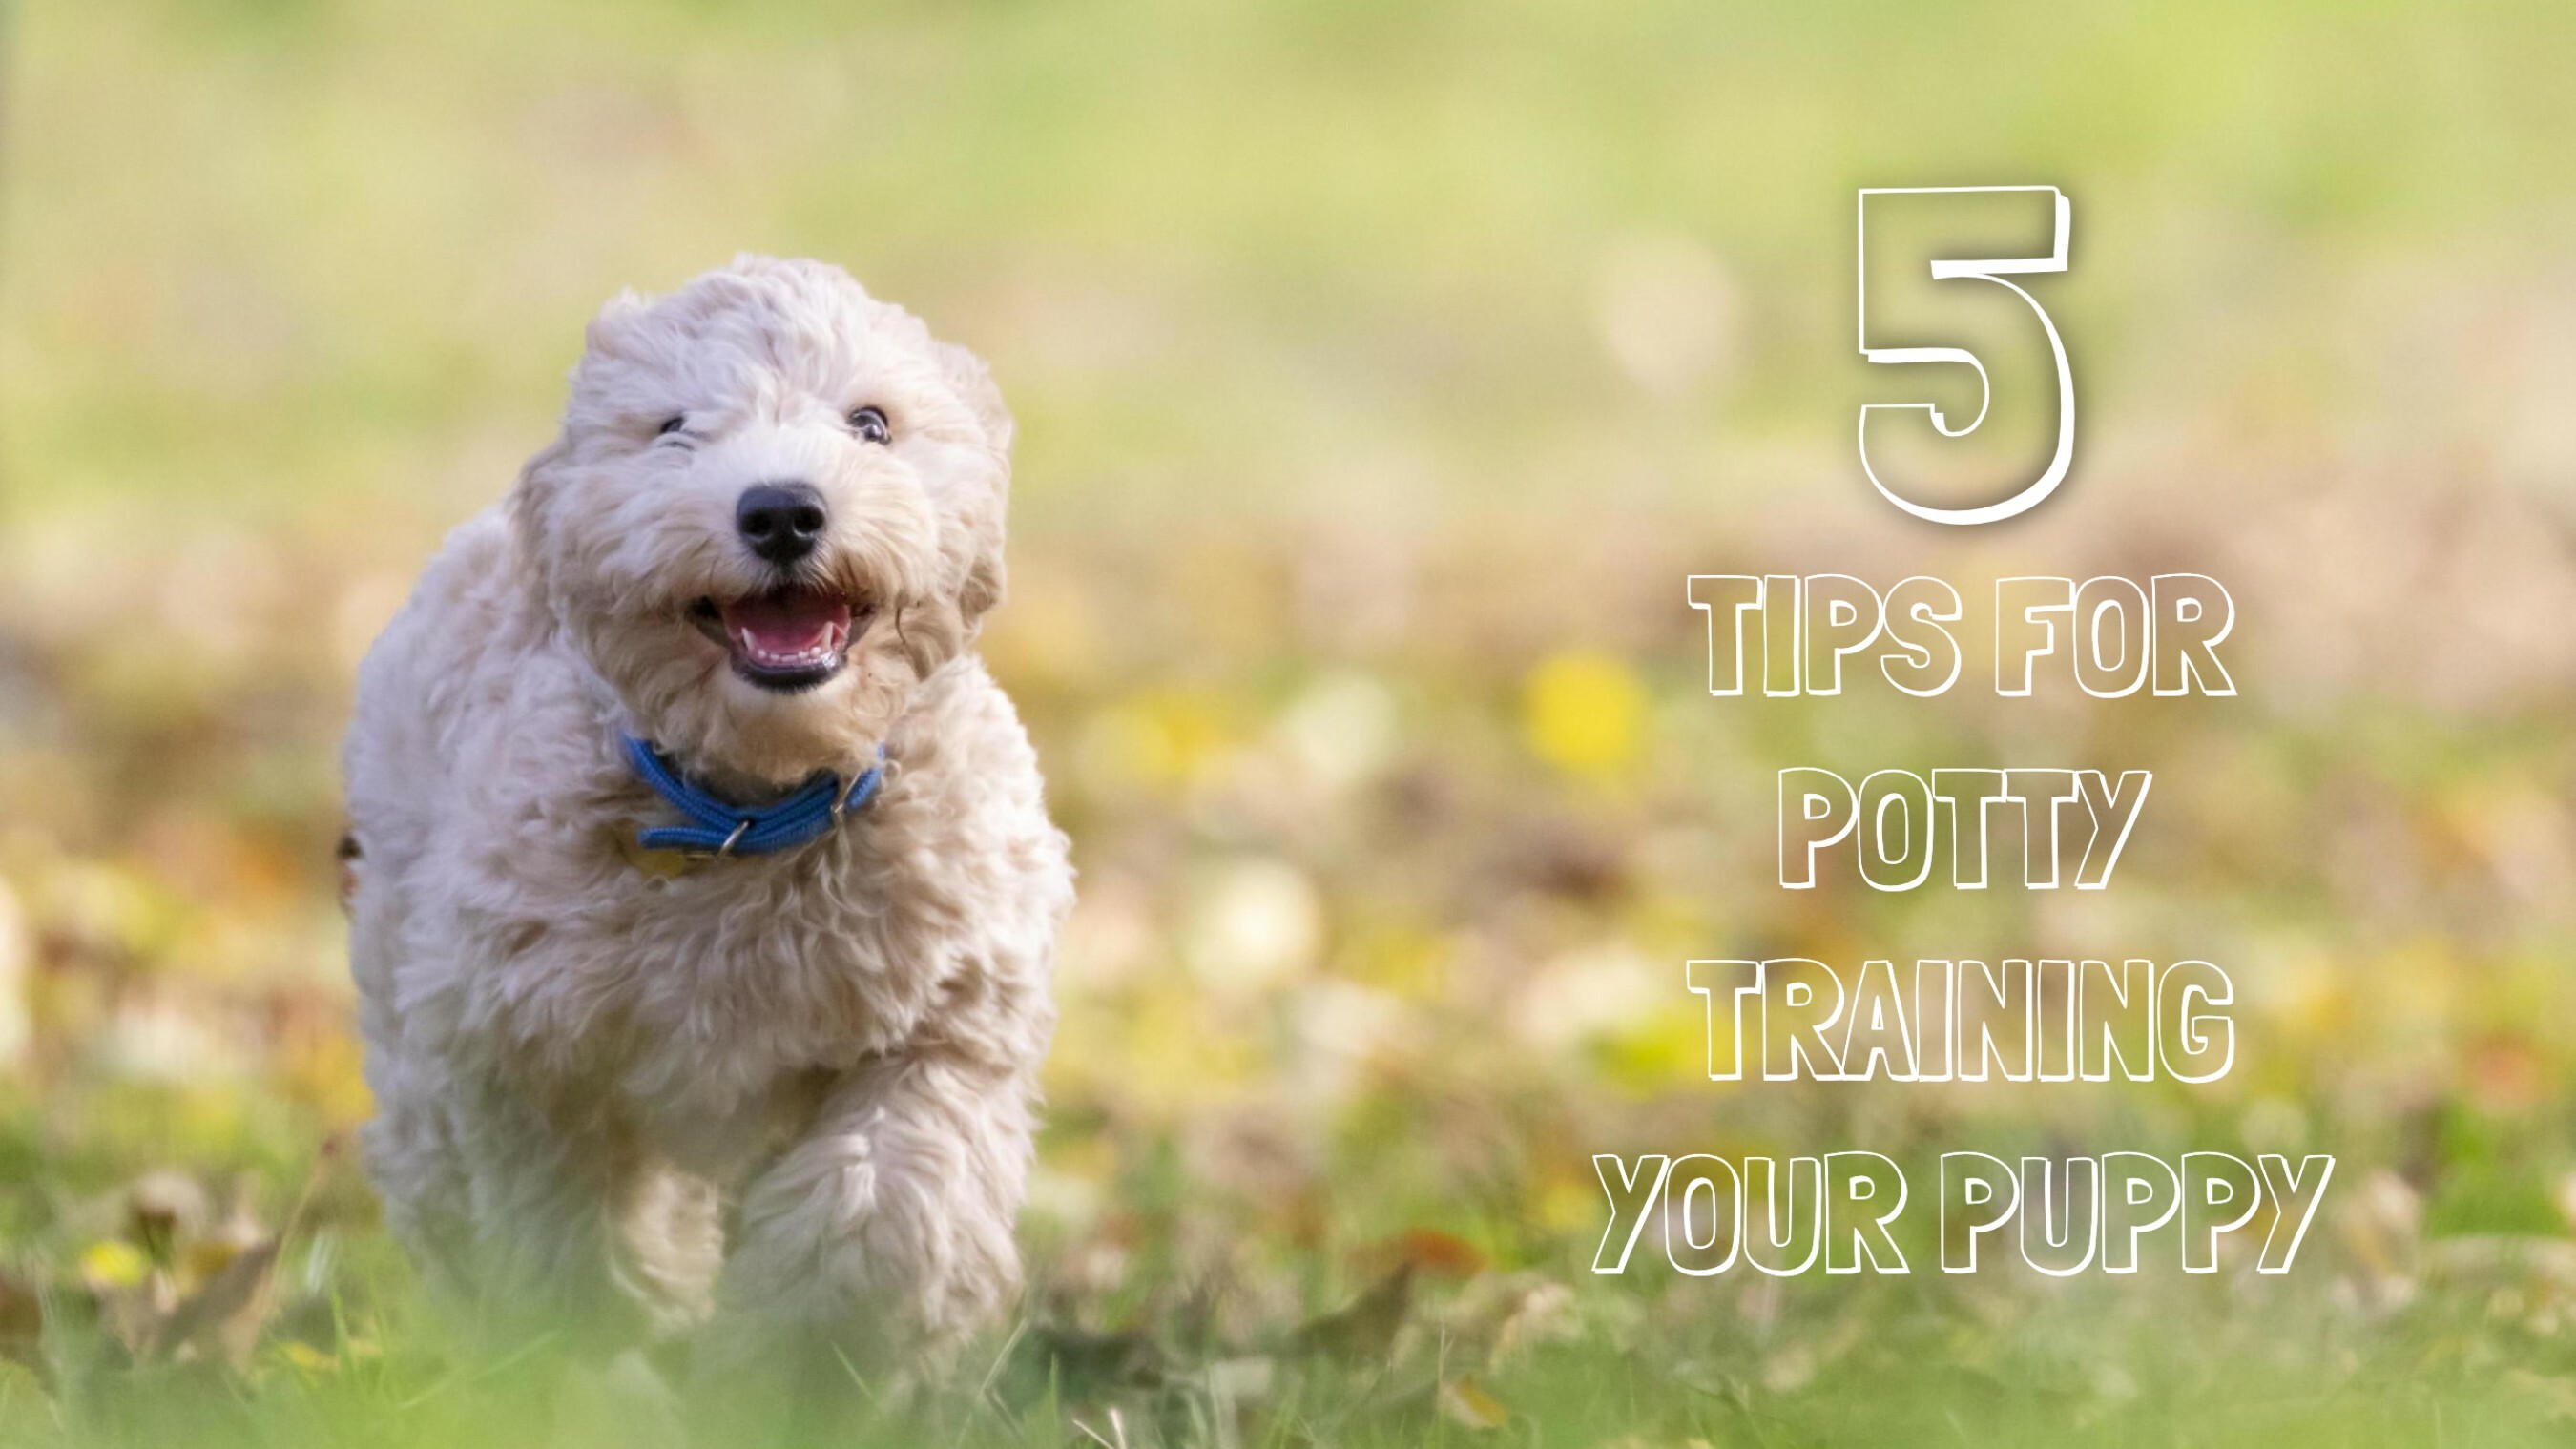 Puppy potty training template